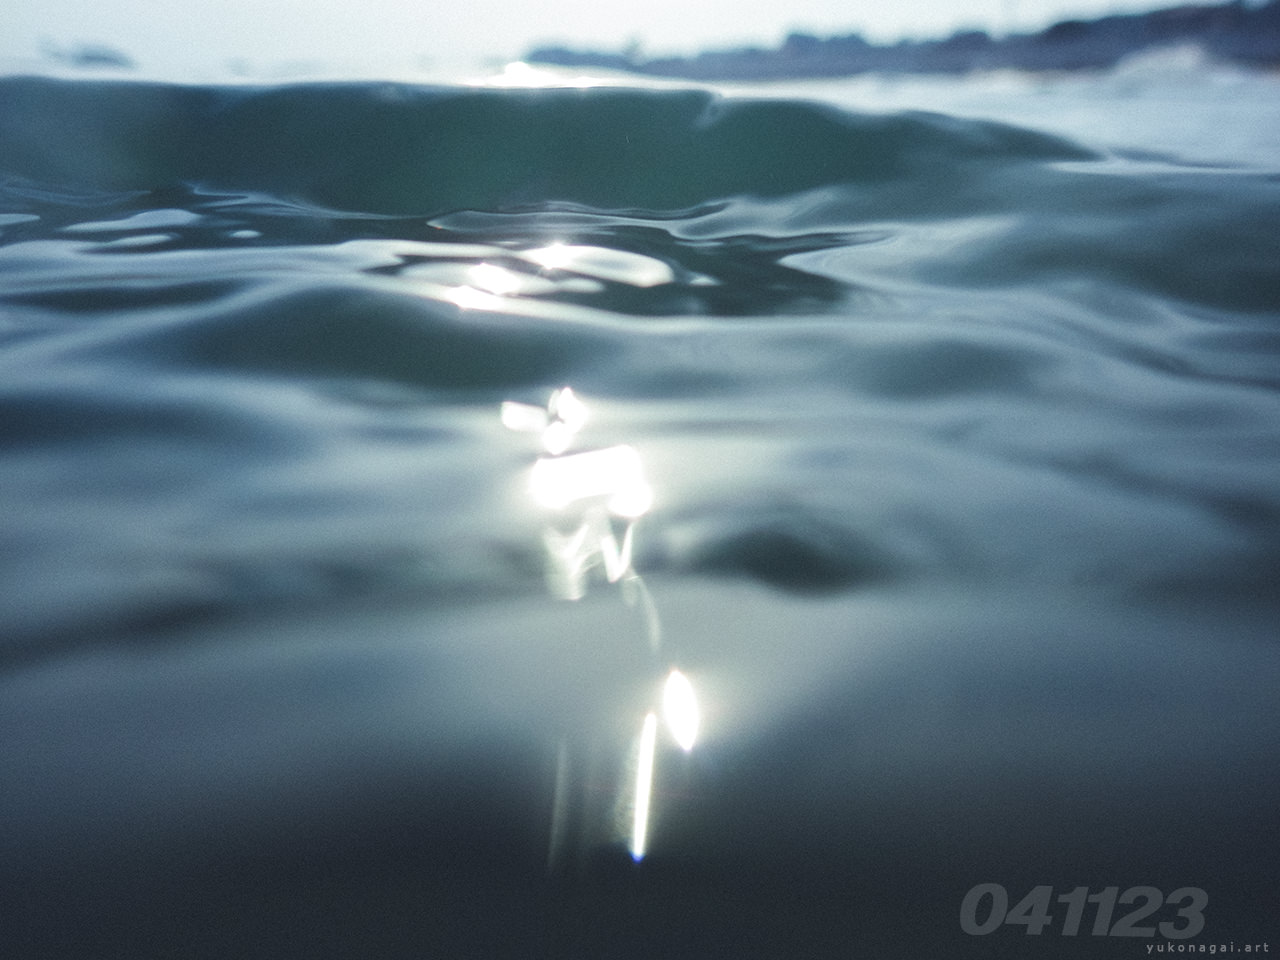 Sea surface with sunlight reflections.